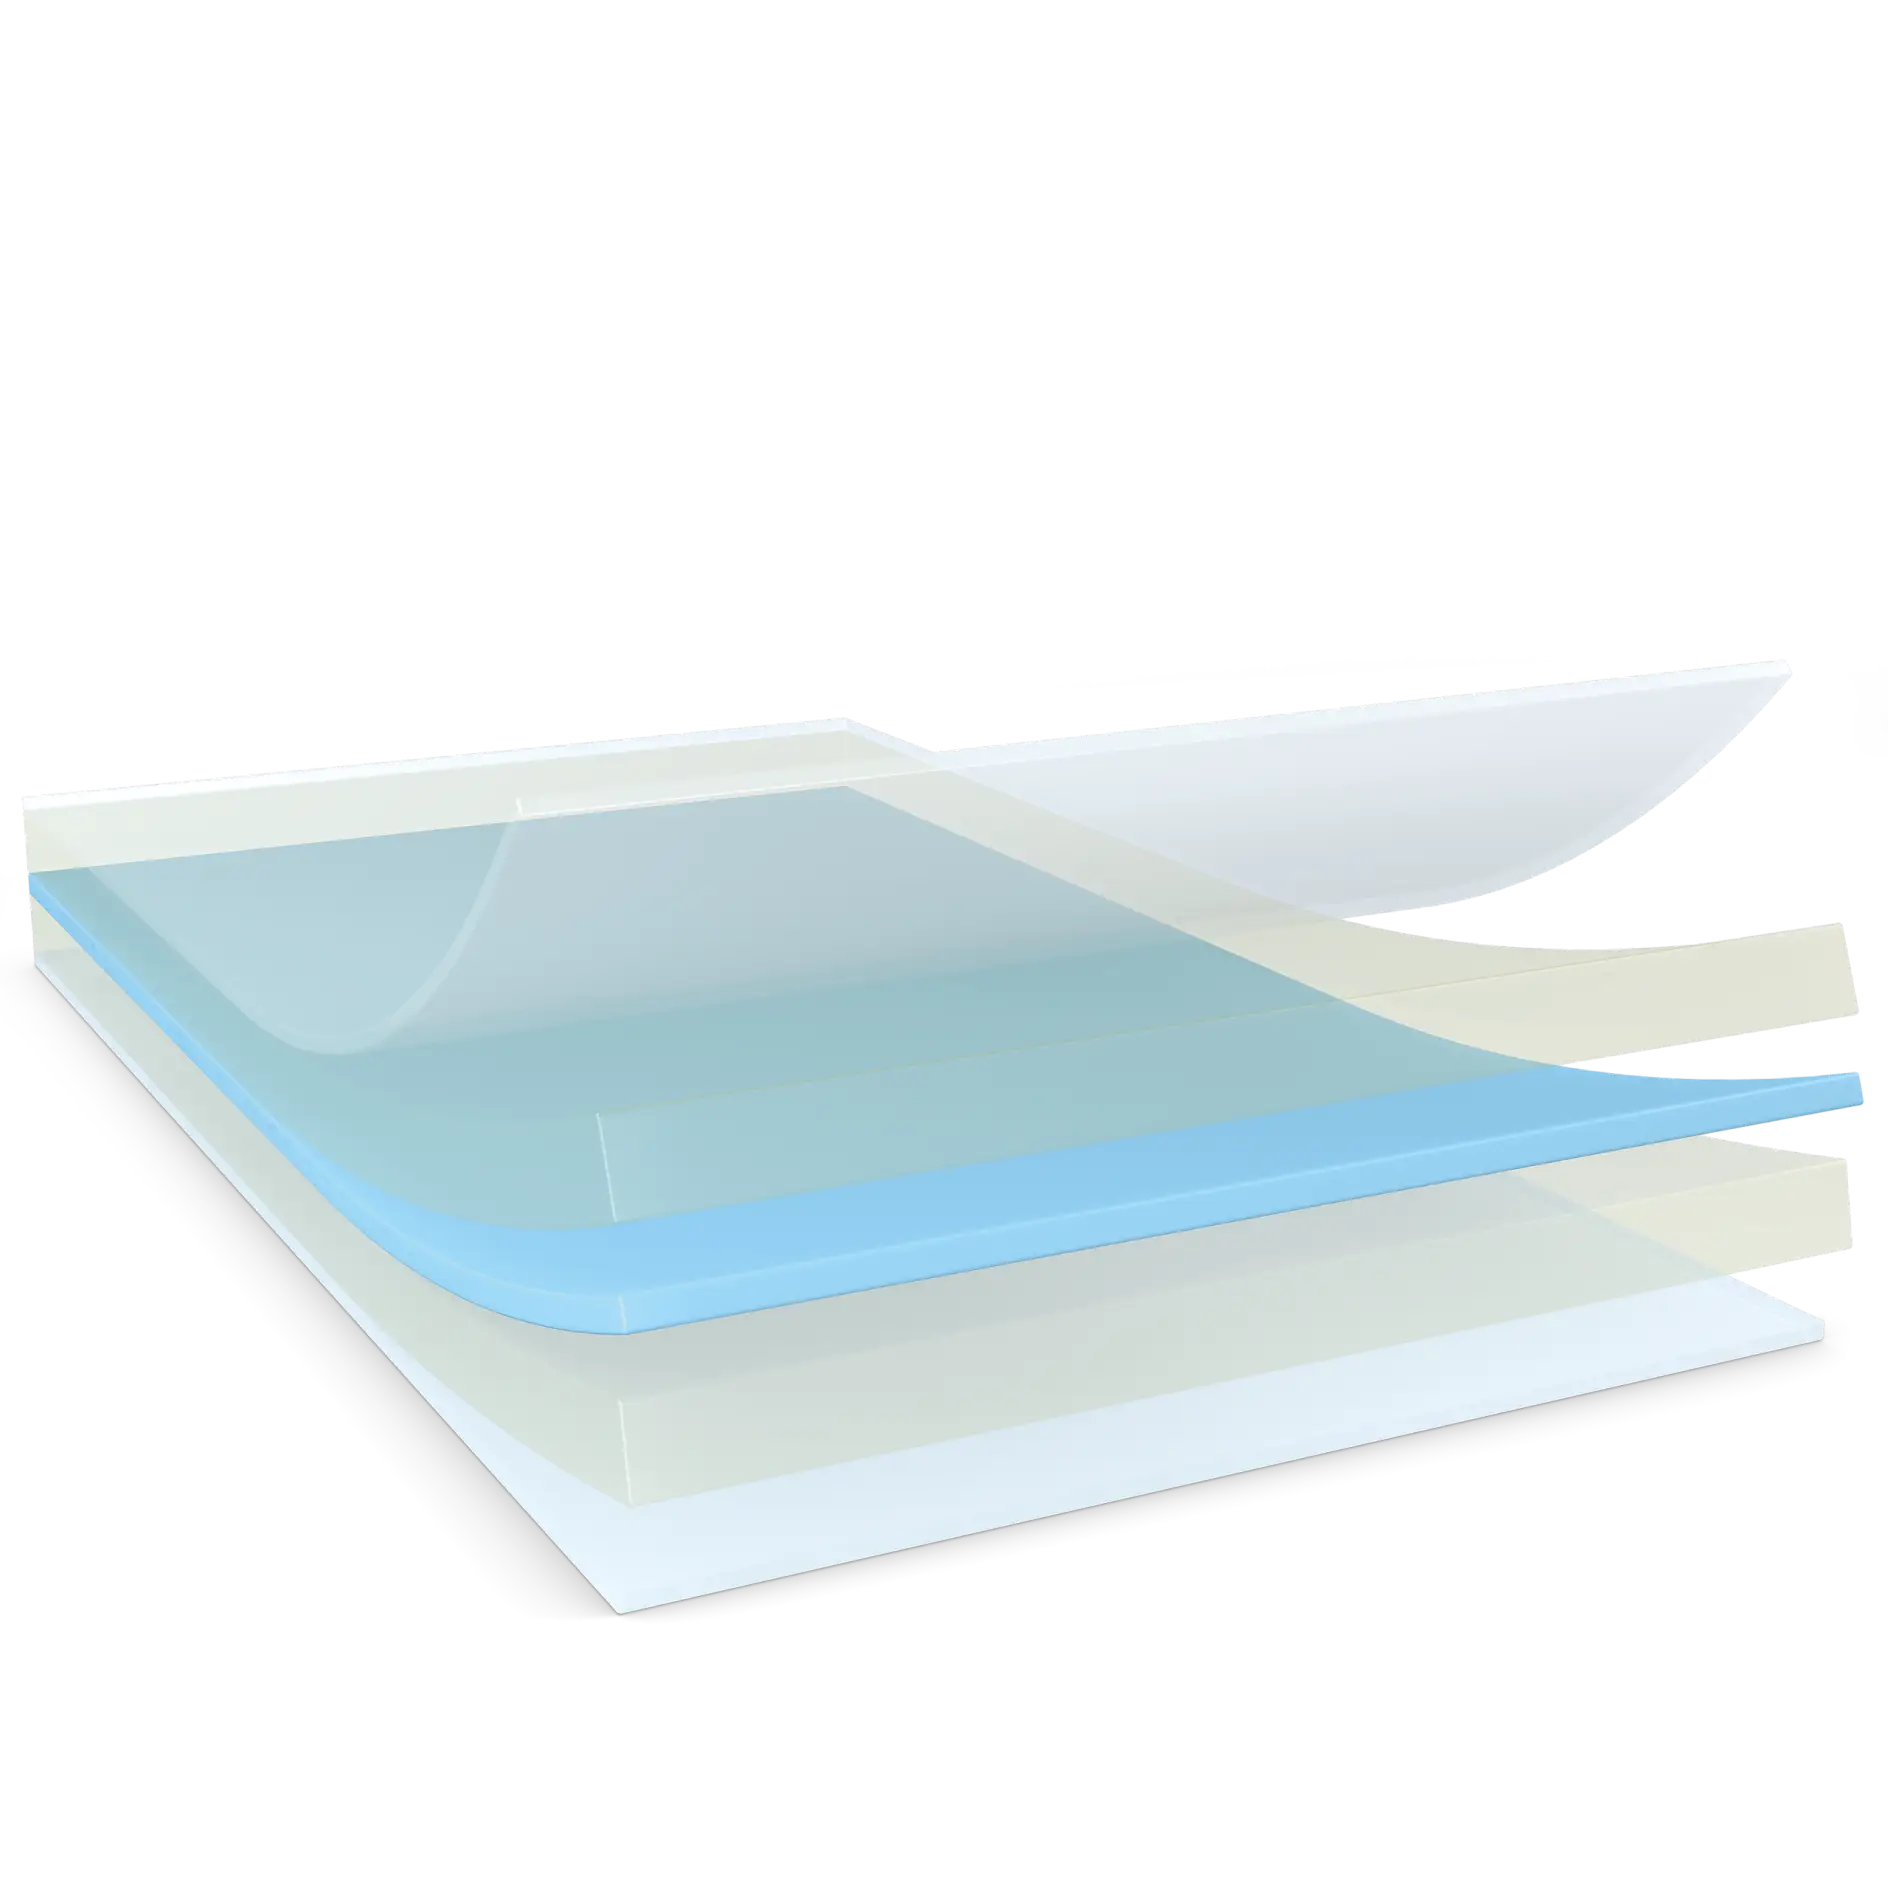 tesa-electronics-structural-bonding-solutions-room-temperature-activation-transparent-with-backing-and-transparent-liner-illustration